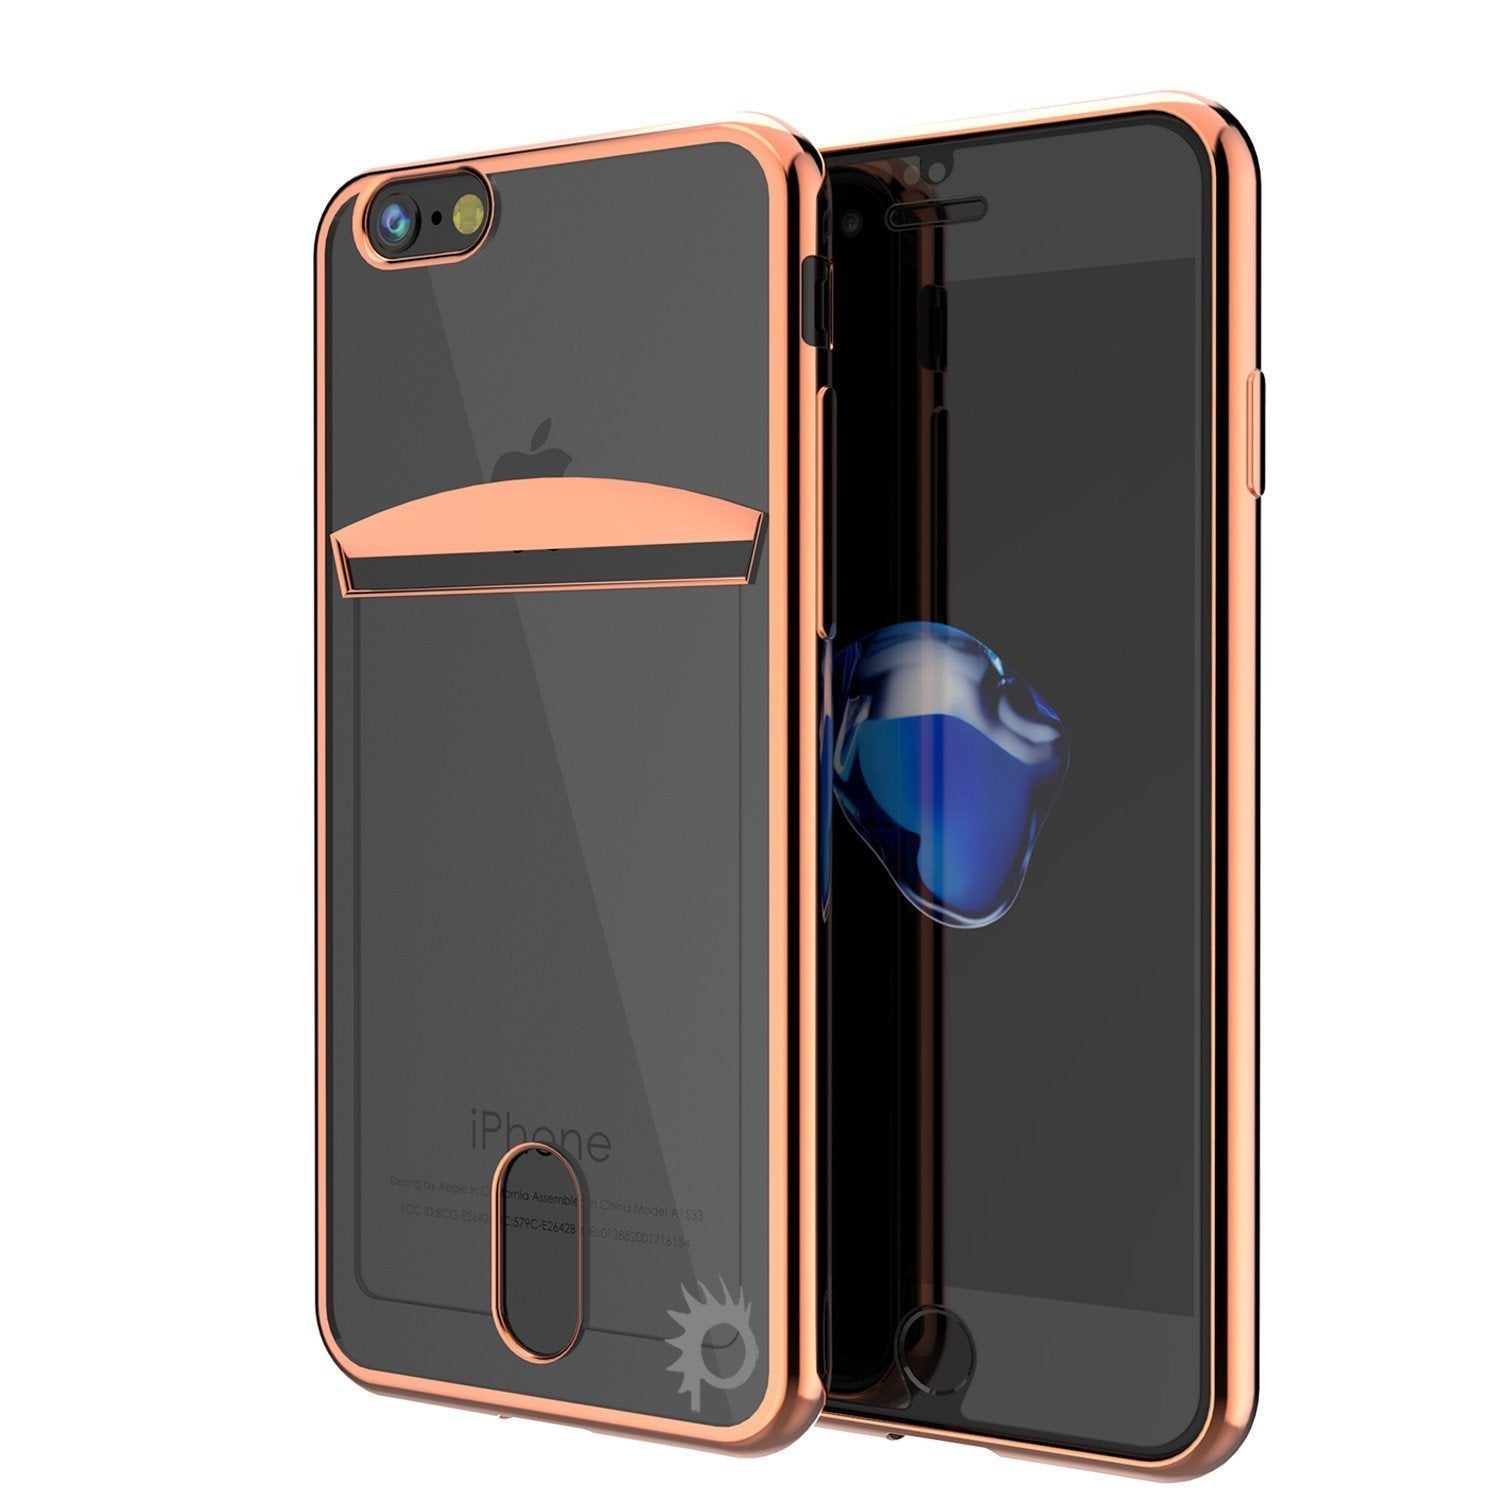 iPhone SE (4.7") Case, PUNKCASE® LUCID Rose Gold Series | Card Slot | SHIELD Screen Protector | Ultra fit